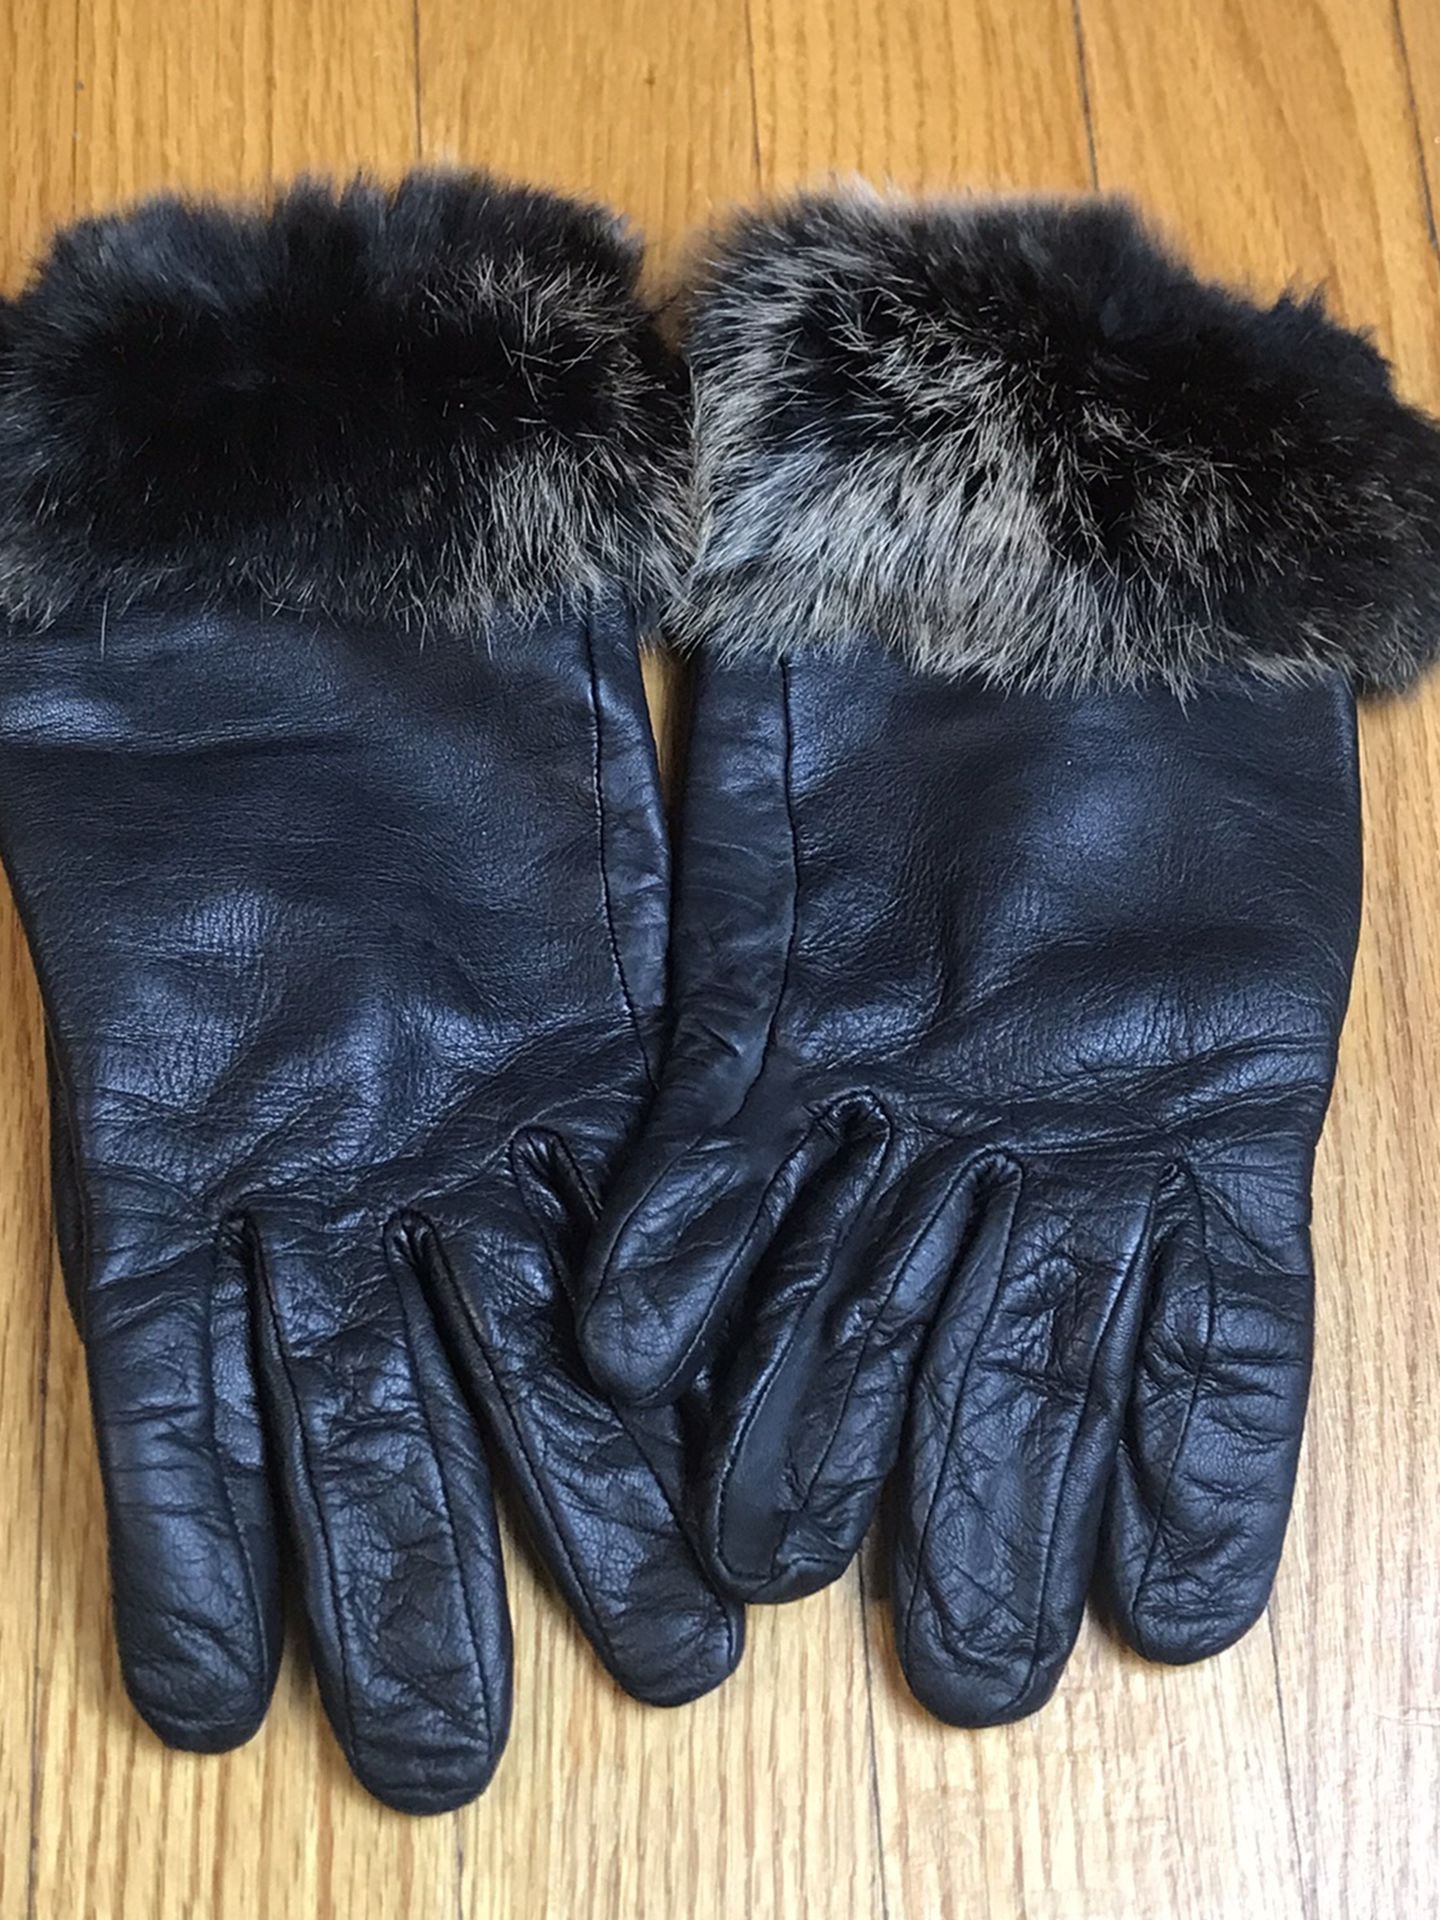 Mercer Madison Womens S Gloves Black Genuine Leather Rabbit Fur Trim Thinsulate Pre-Owned Sold as is ( see all pictures)